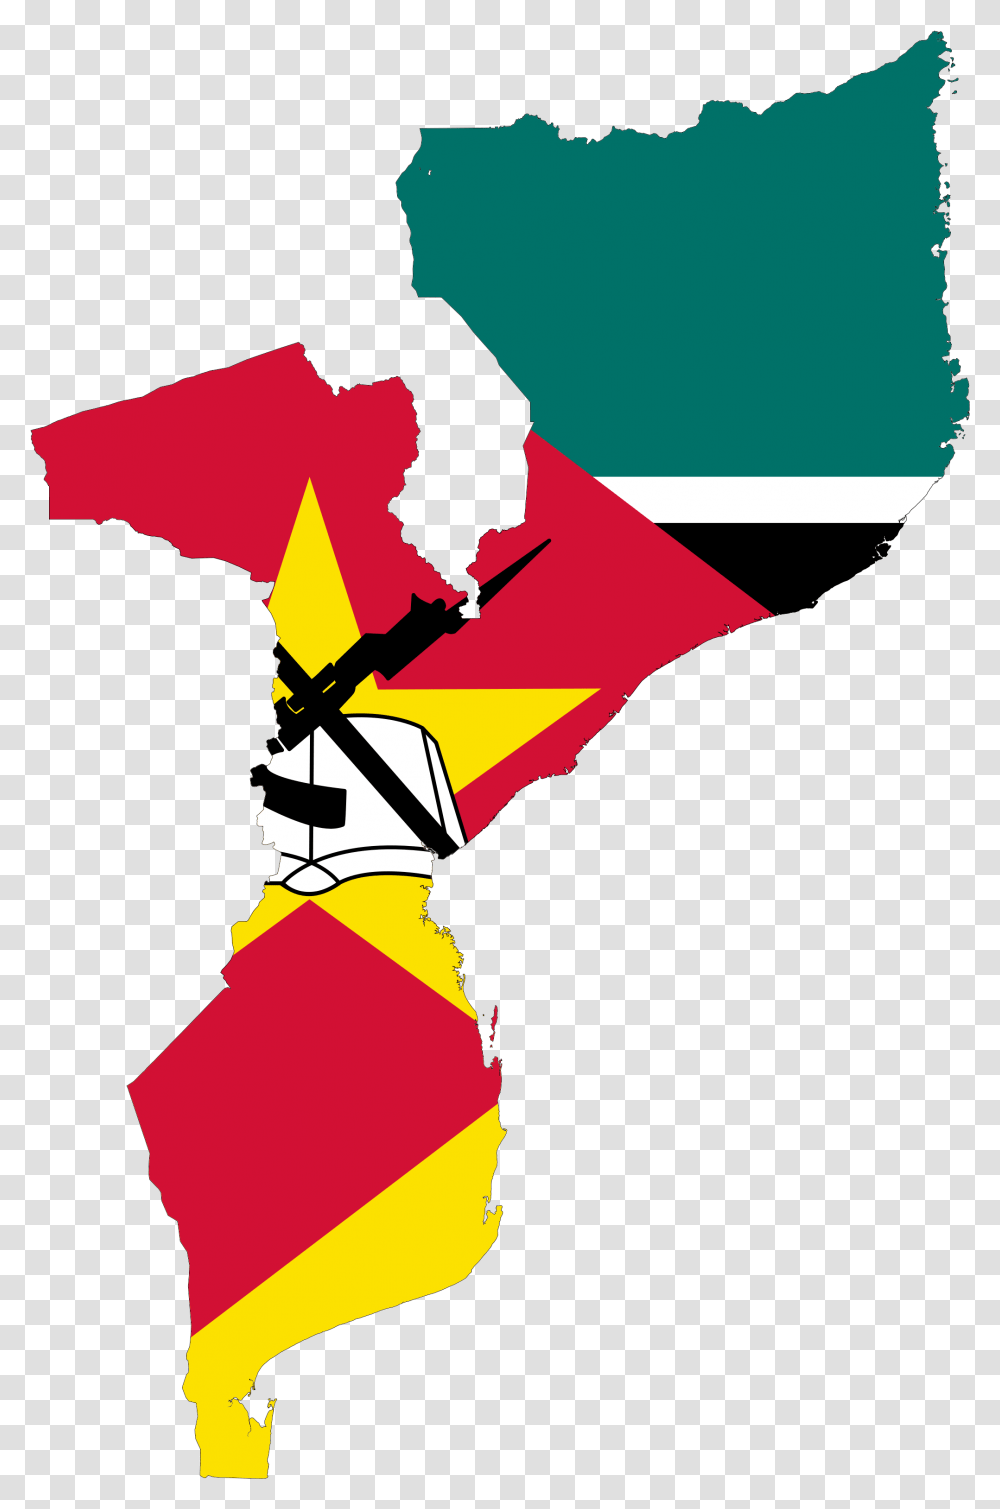 Mozambique Map And Flag, Logo Transparent Png